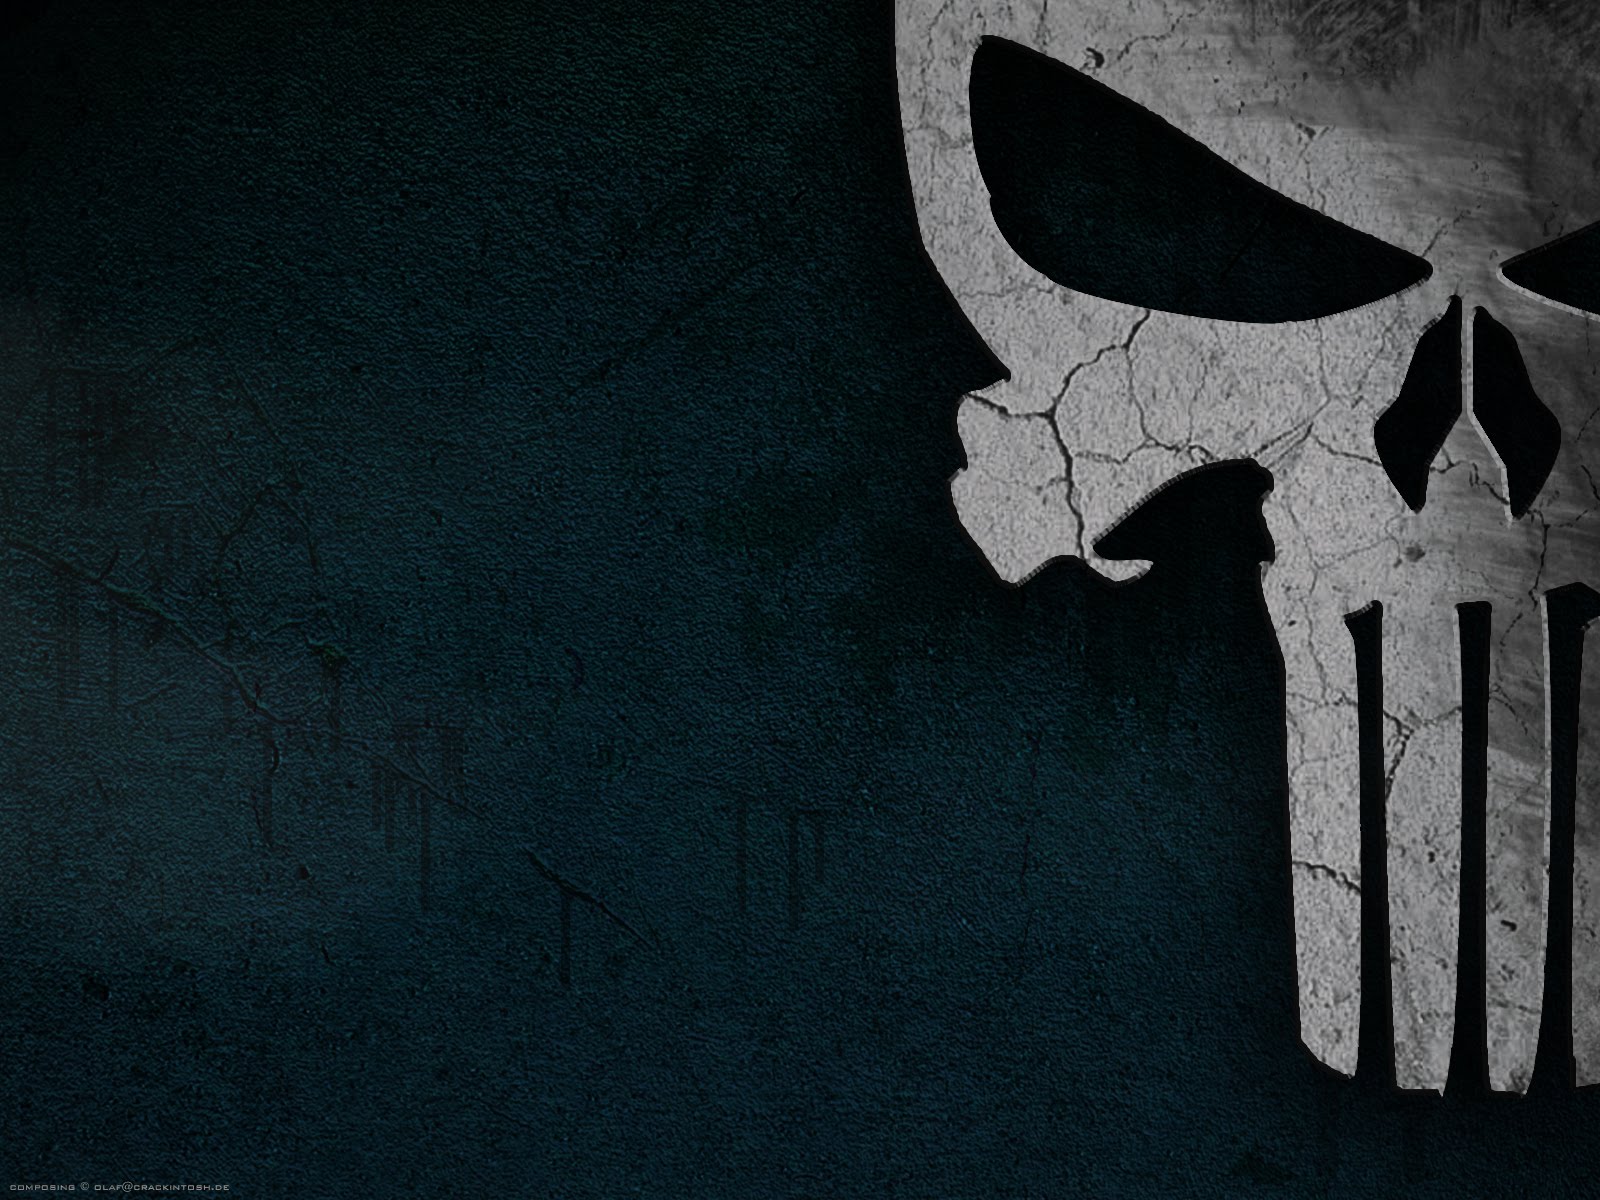 Punisher skull wallpaper Clickandseeworld is all about